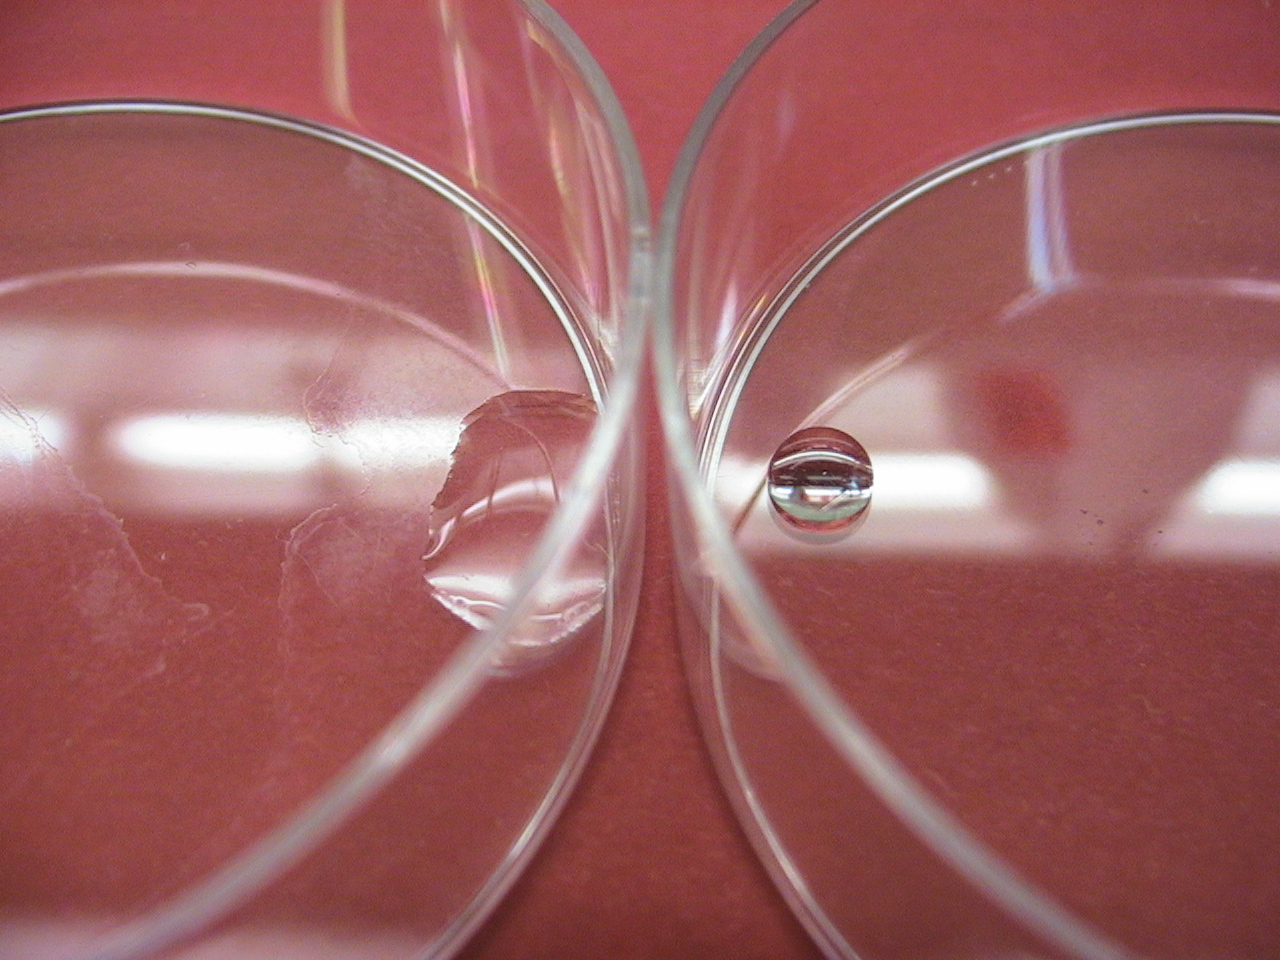 The normally hydrophobic surface of the petri dish on the left is made hydrophillic by coating it with purified chaplins as seen on the right.